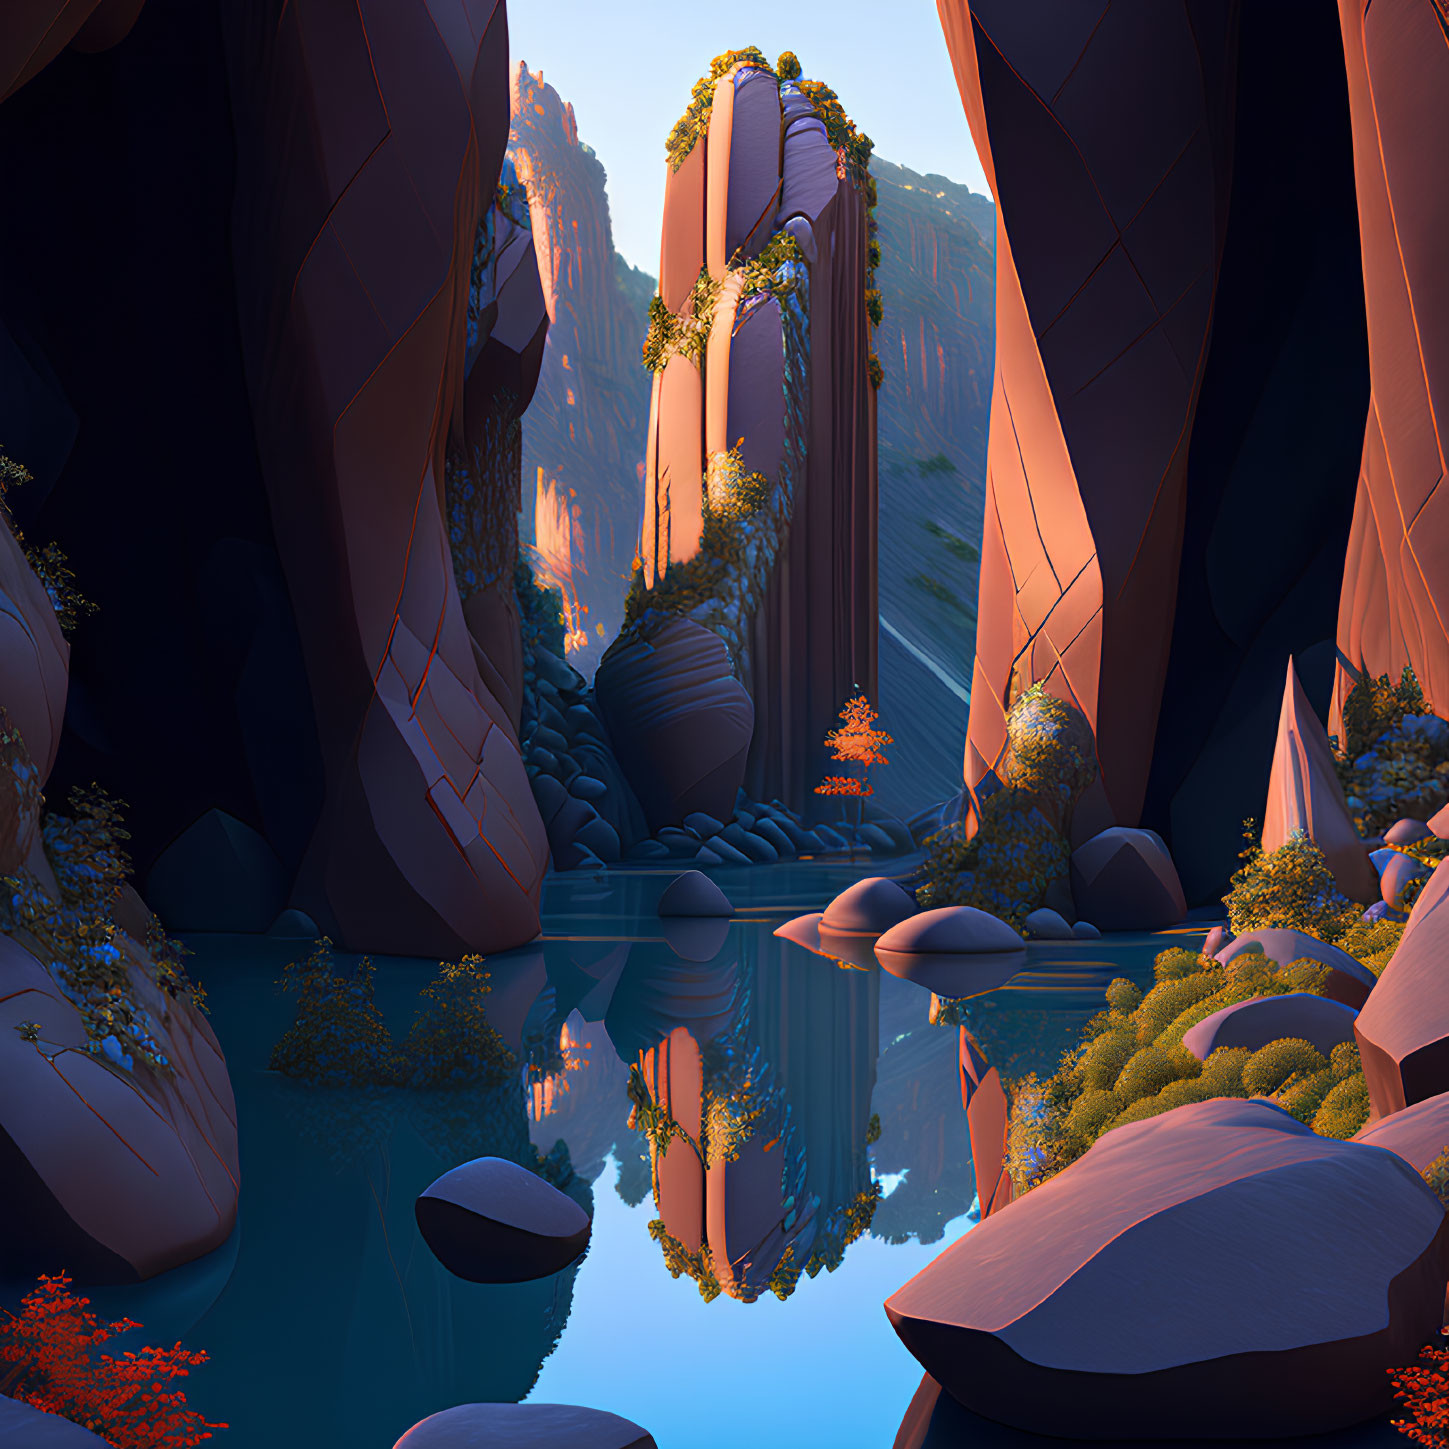 Tranquil digital artwork of serene canyon with reflective water, lush vegetation.